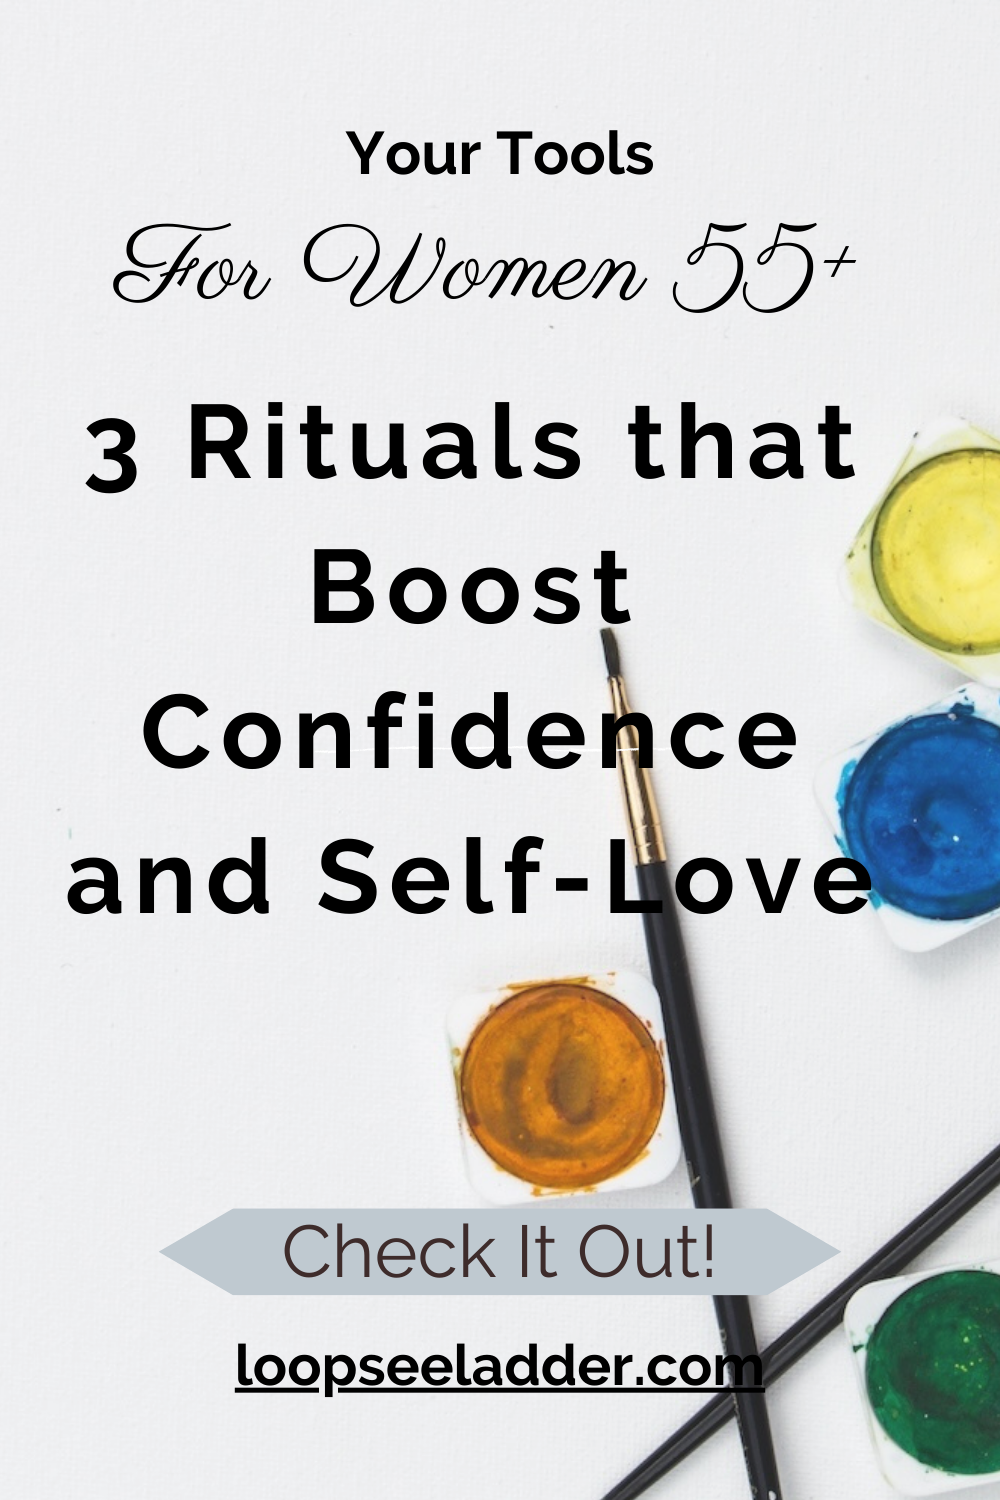 Revealing the 3 Ancient Rituals That Boost Confidence and Self-Love in Women 55+